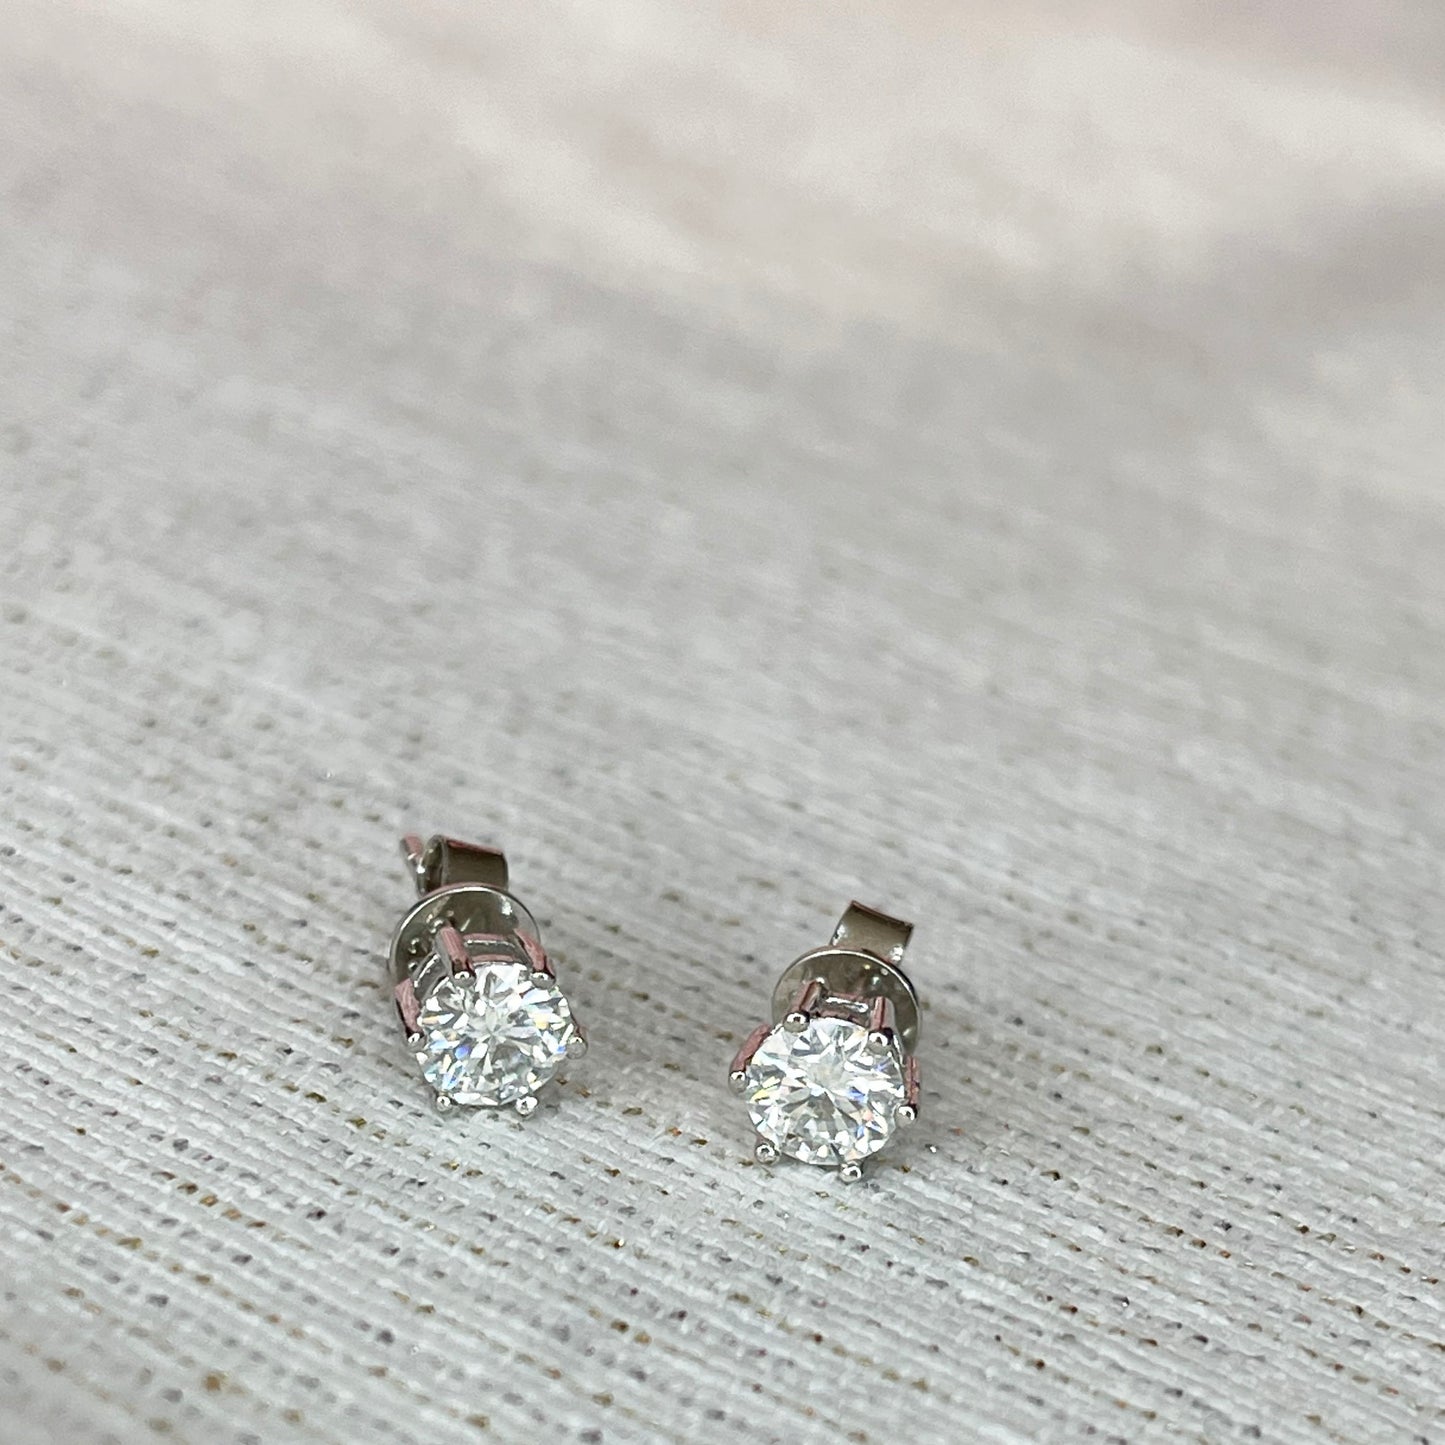 Earring Studs with Round Brilliant Cut